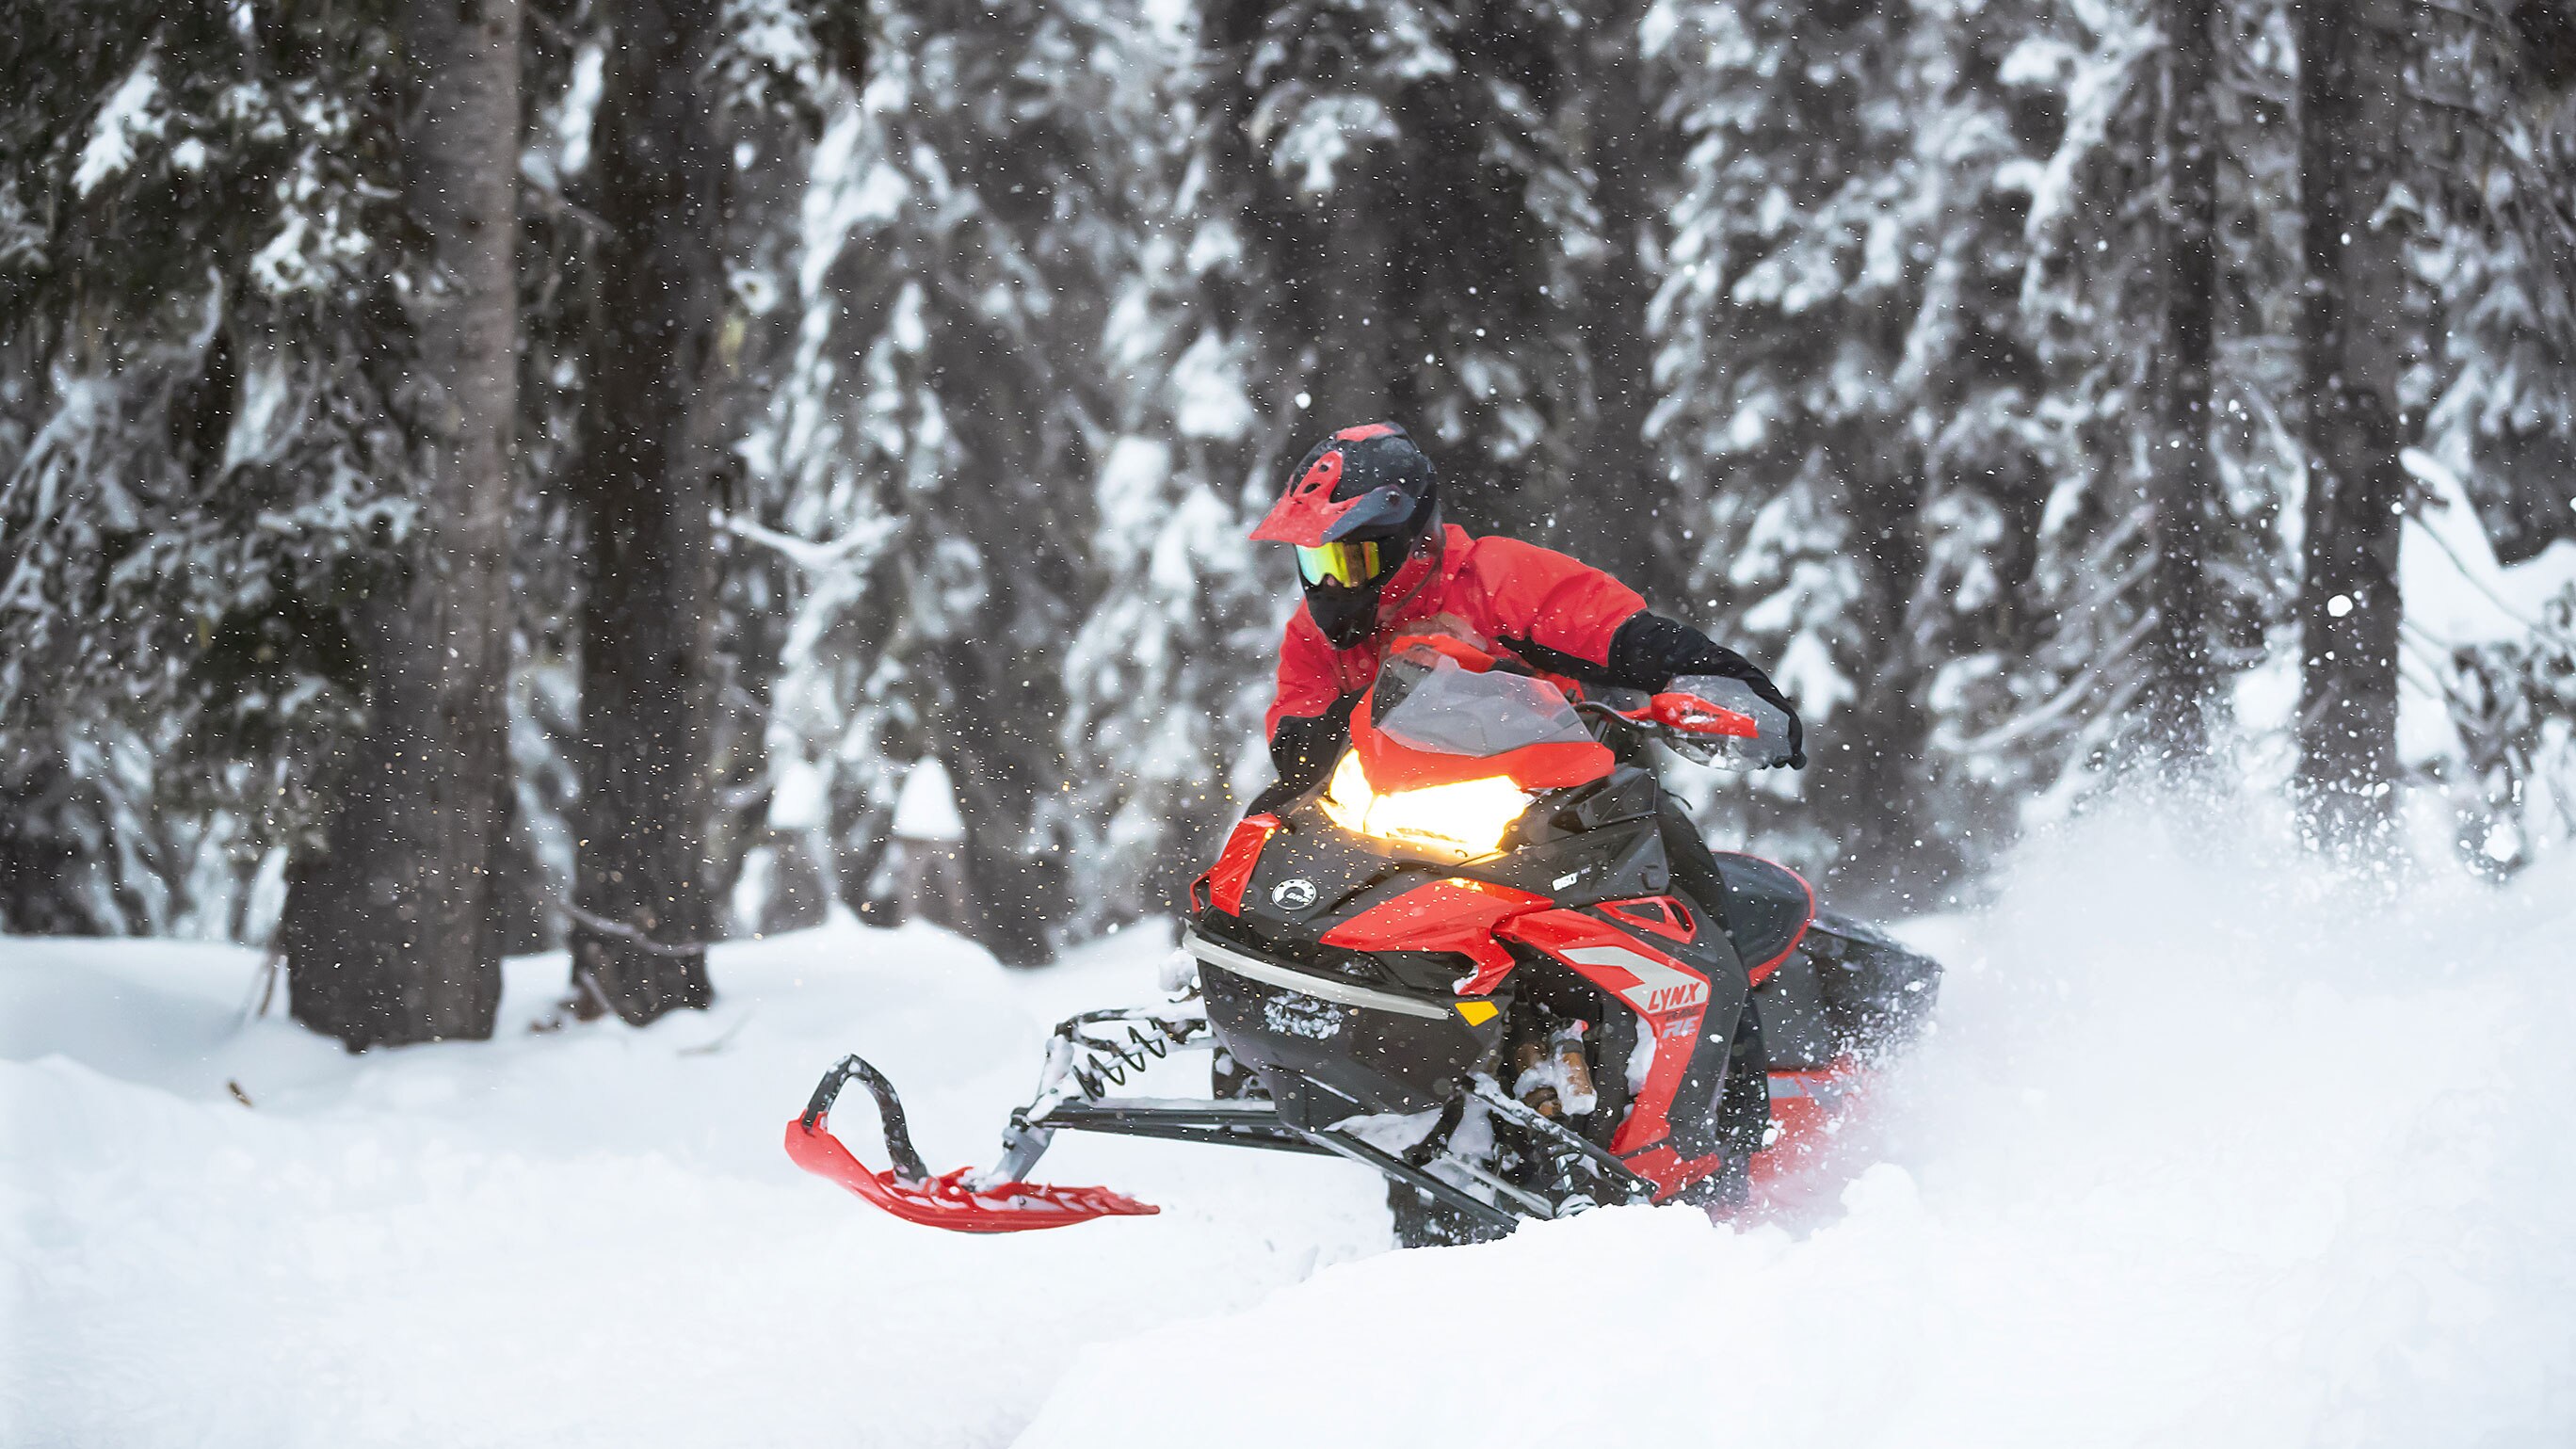 Lynx Rave RE snowmobile curving on a trail